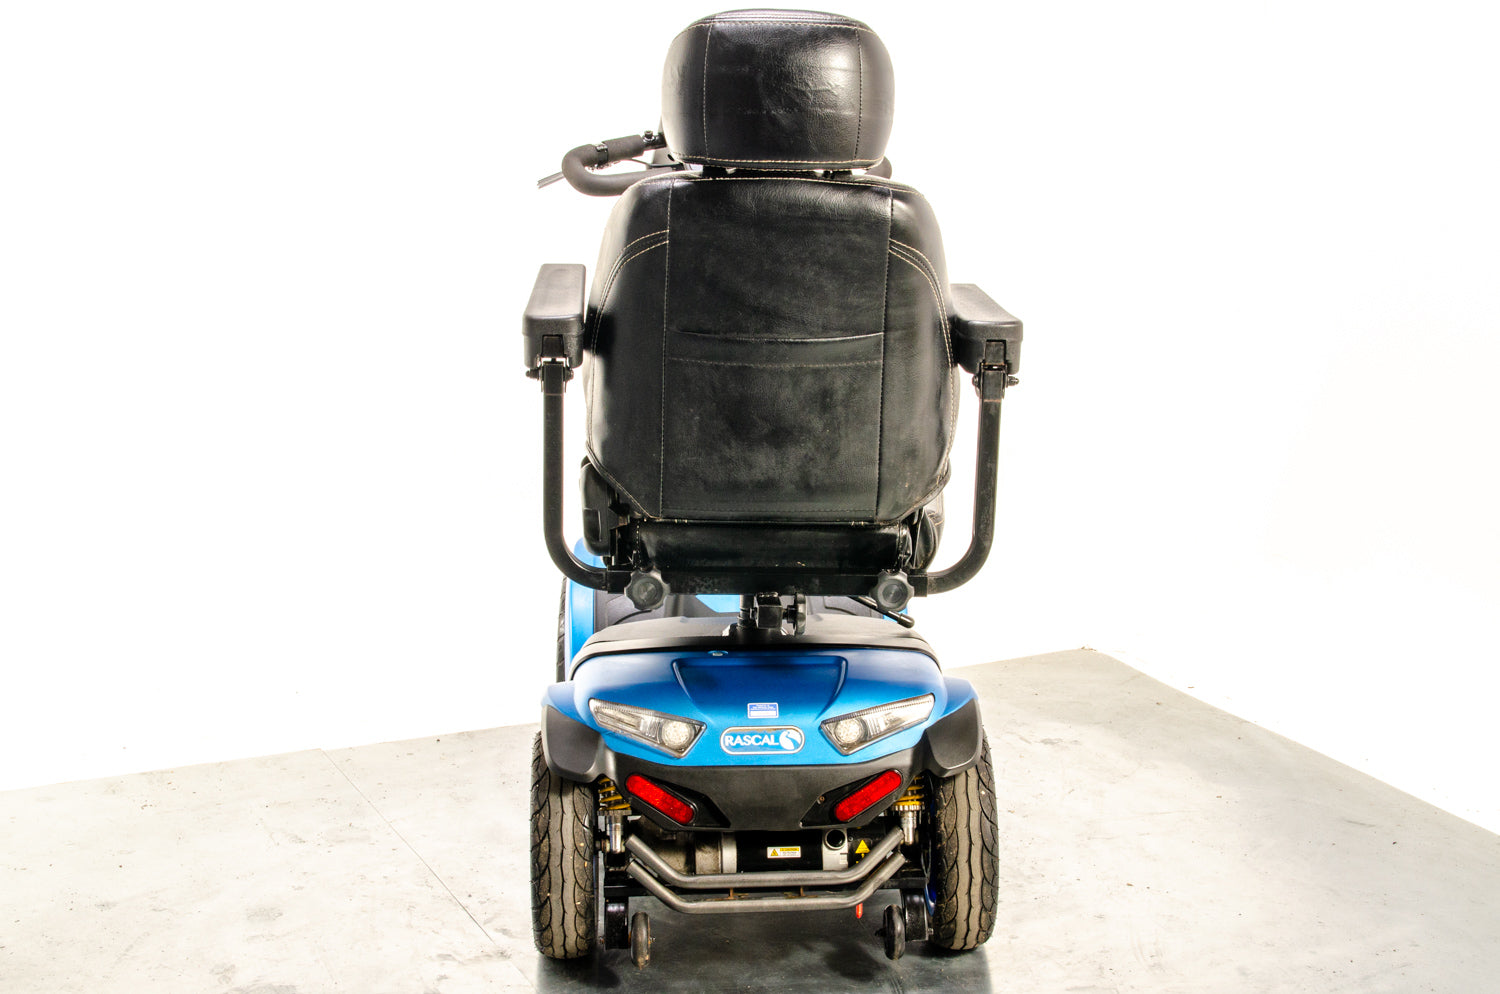 Rascal Vecta Sport Compact Used Electric Mobility Scooter 8mph Max Grip Suspension All-Terrain Road Legal Blue 13318